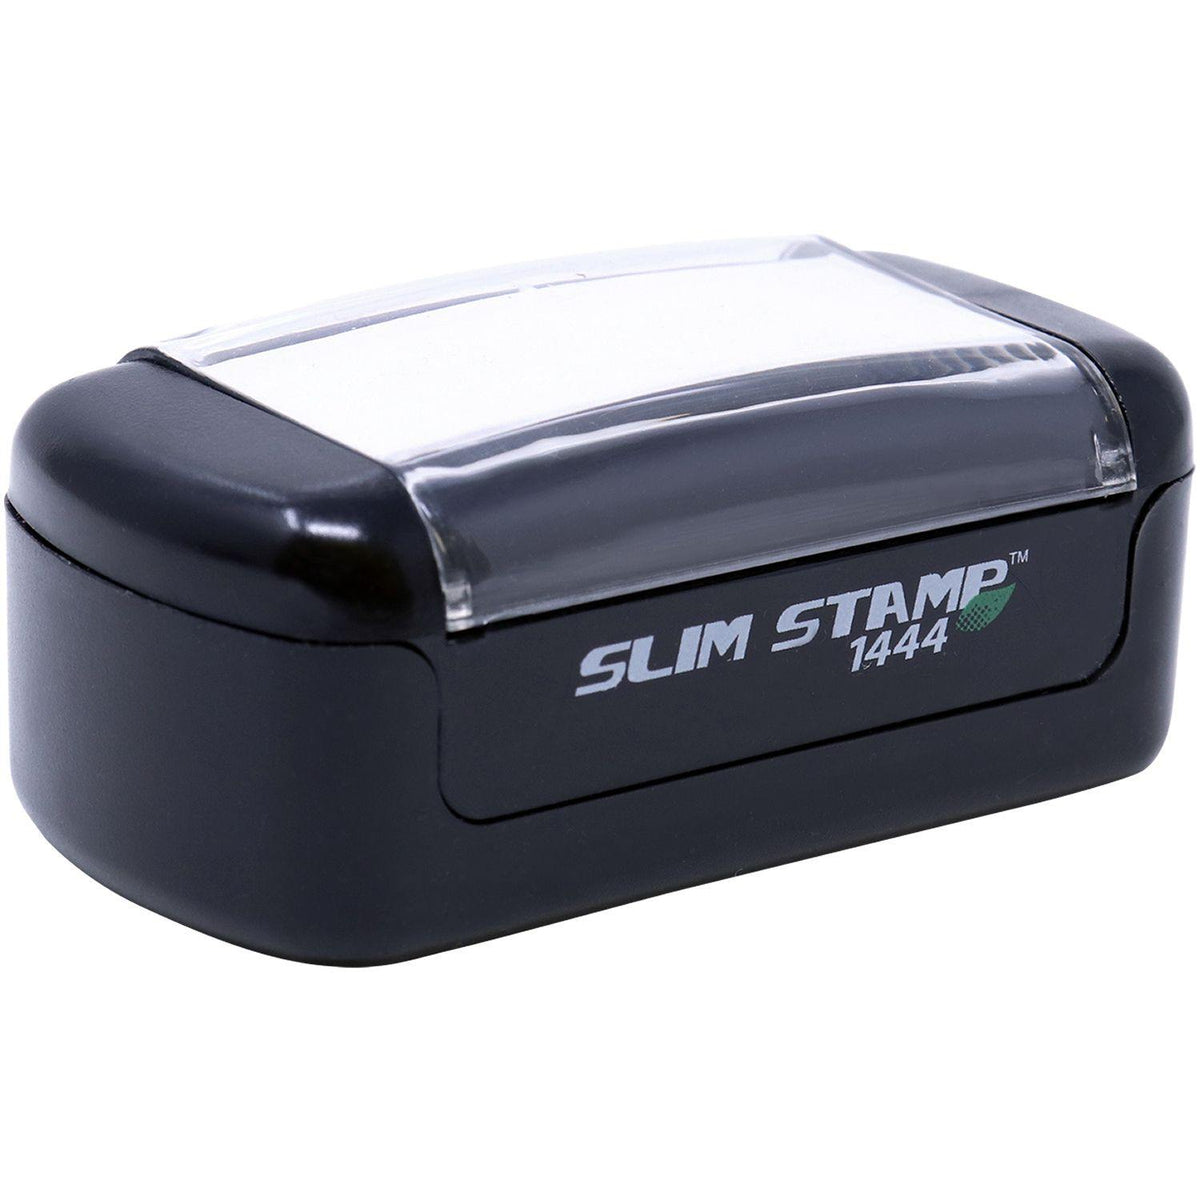 Alt View of Slim Pre-Inked Confirmation of Phone Order Stamp Mount Angle